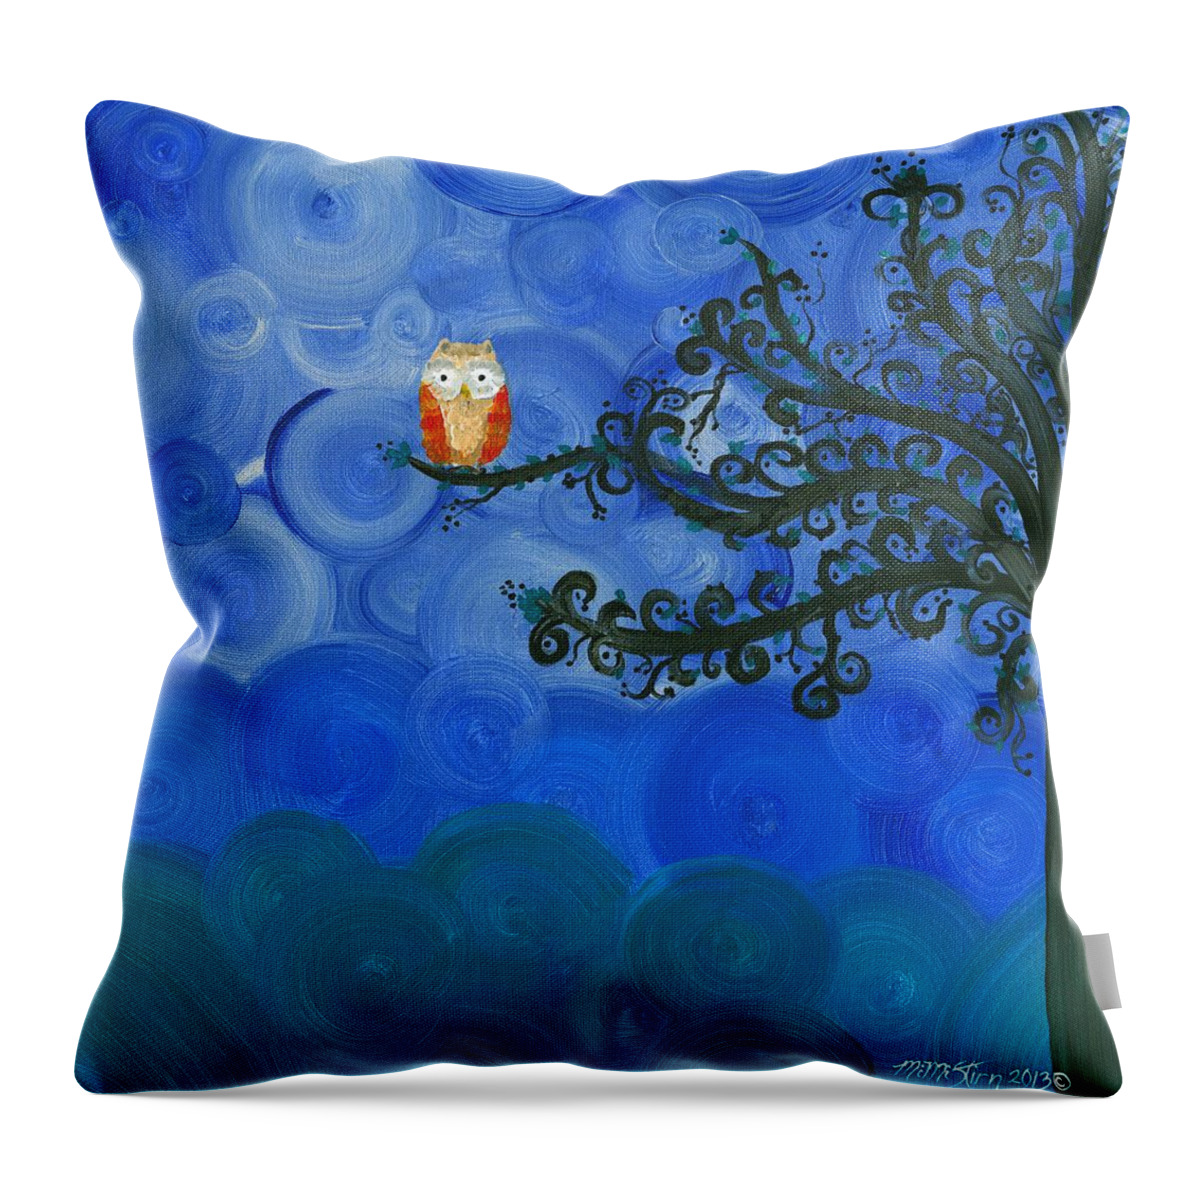 Owls Throw Pillow featuring the painting Owl Singles - 01 by MiMi Stirn